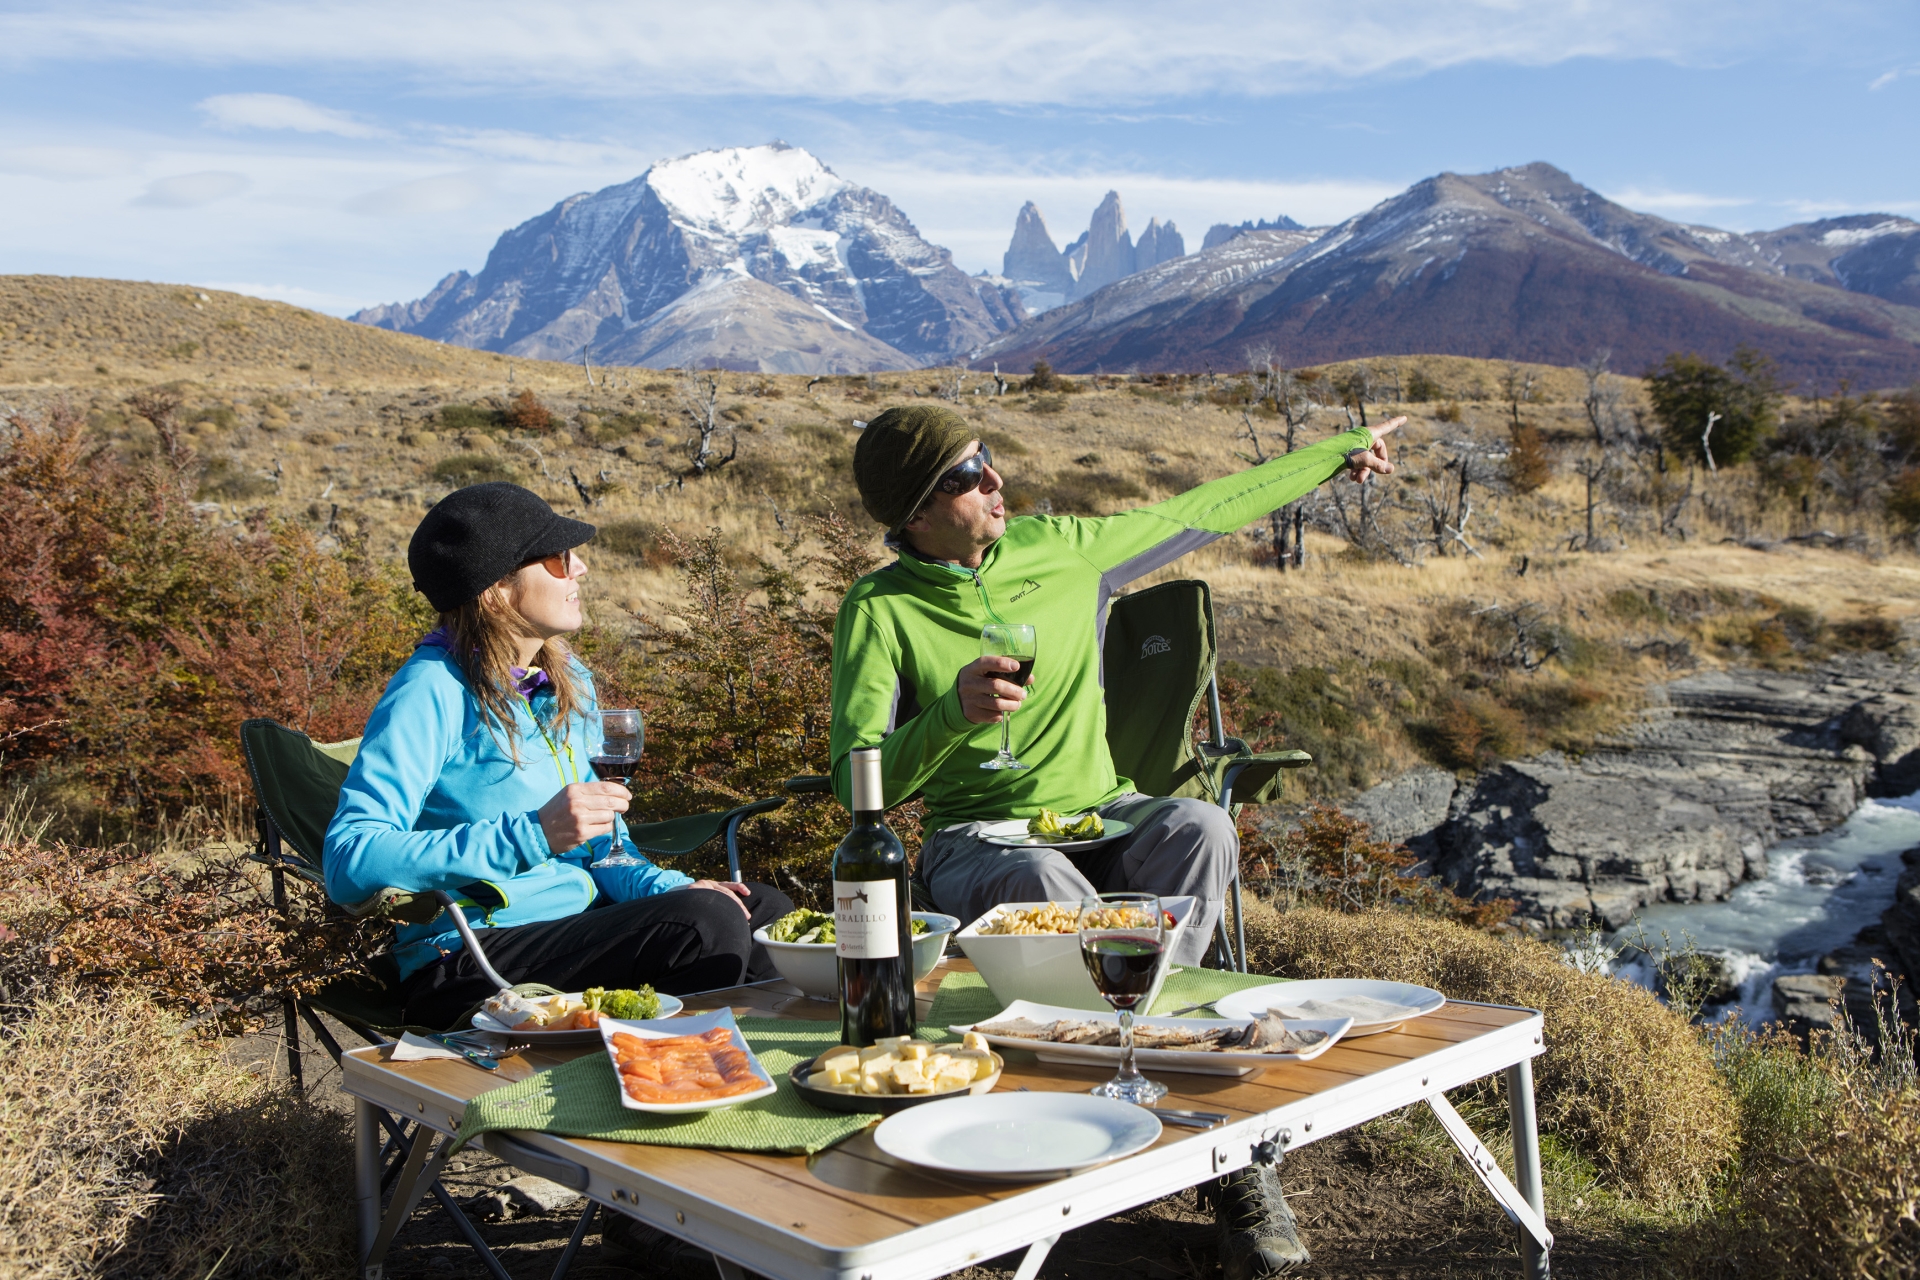 Picnic lunch - Patagonia Camp 